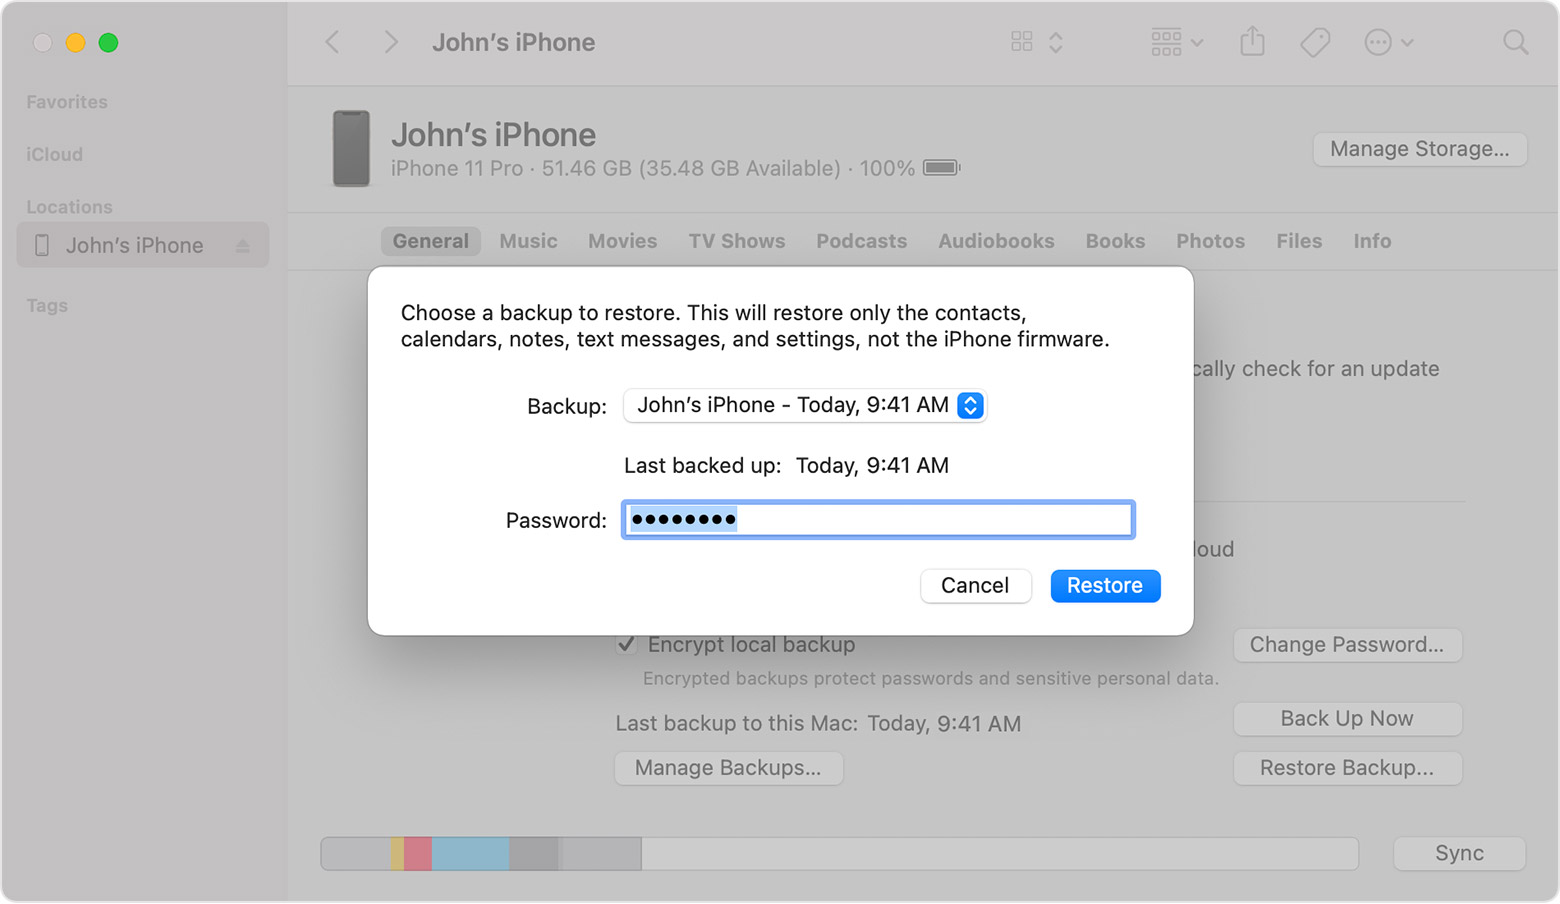 A Finder window with a prompt to choose a backup and enter your password.